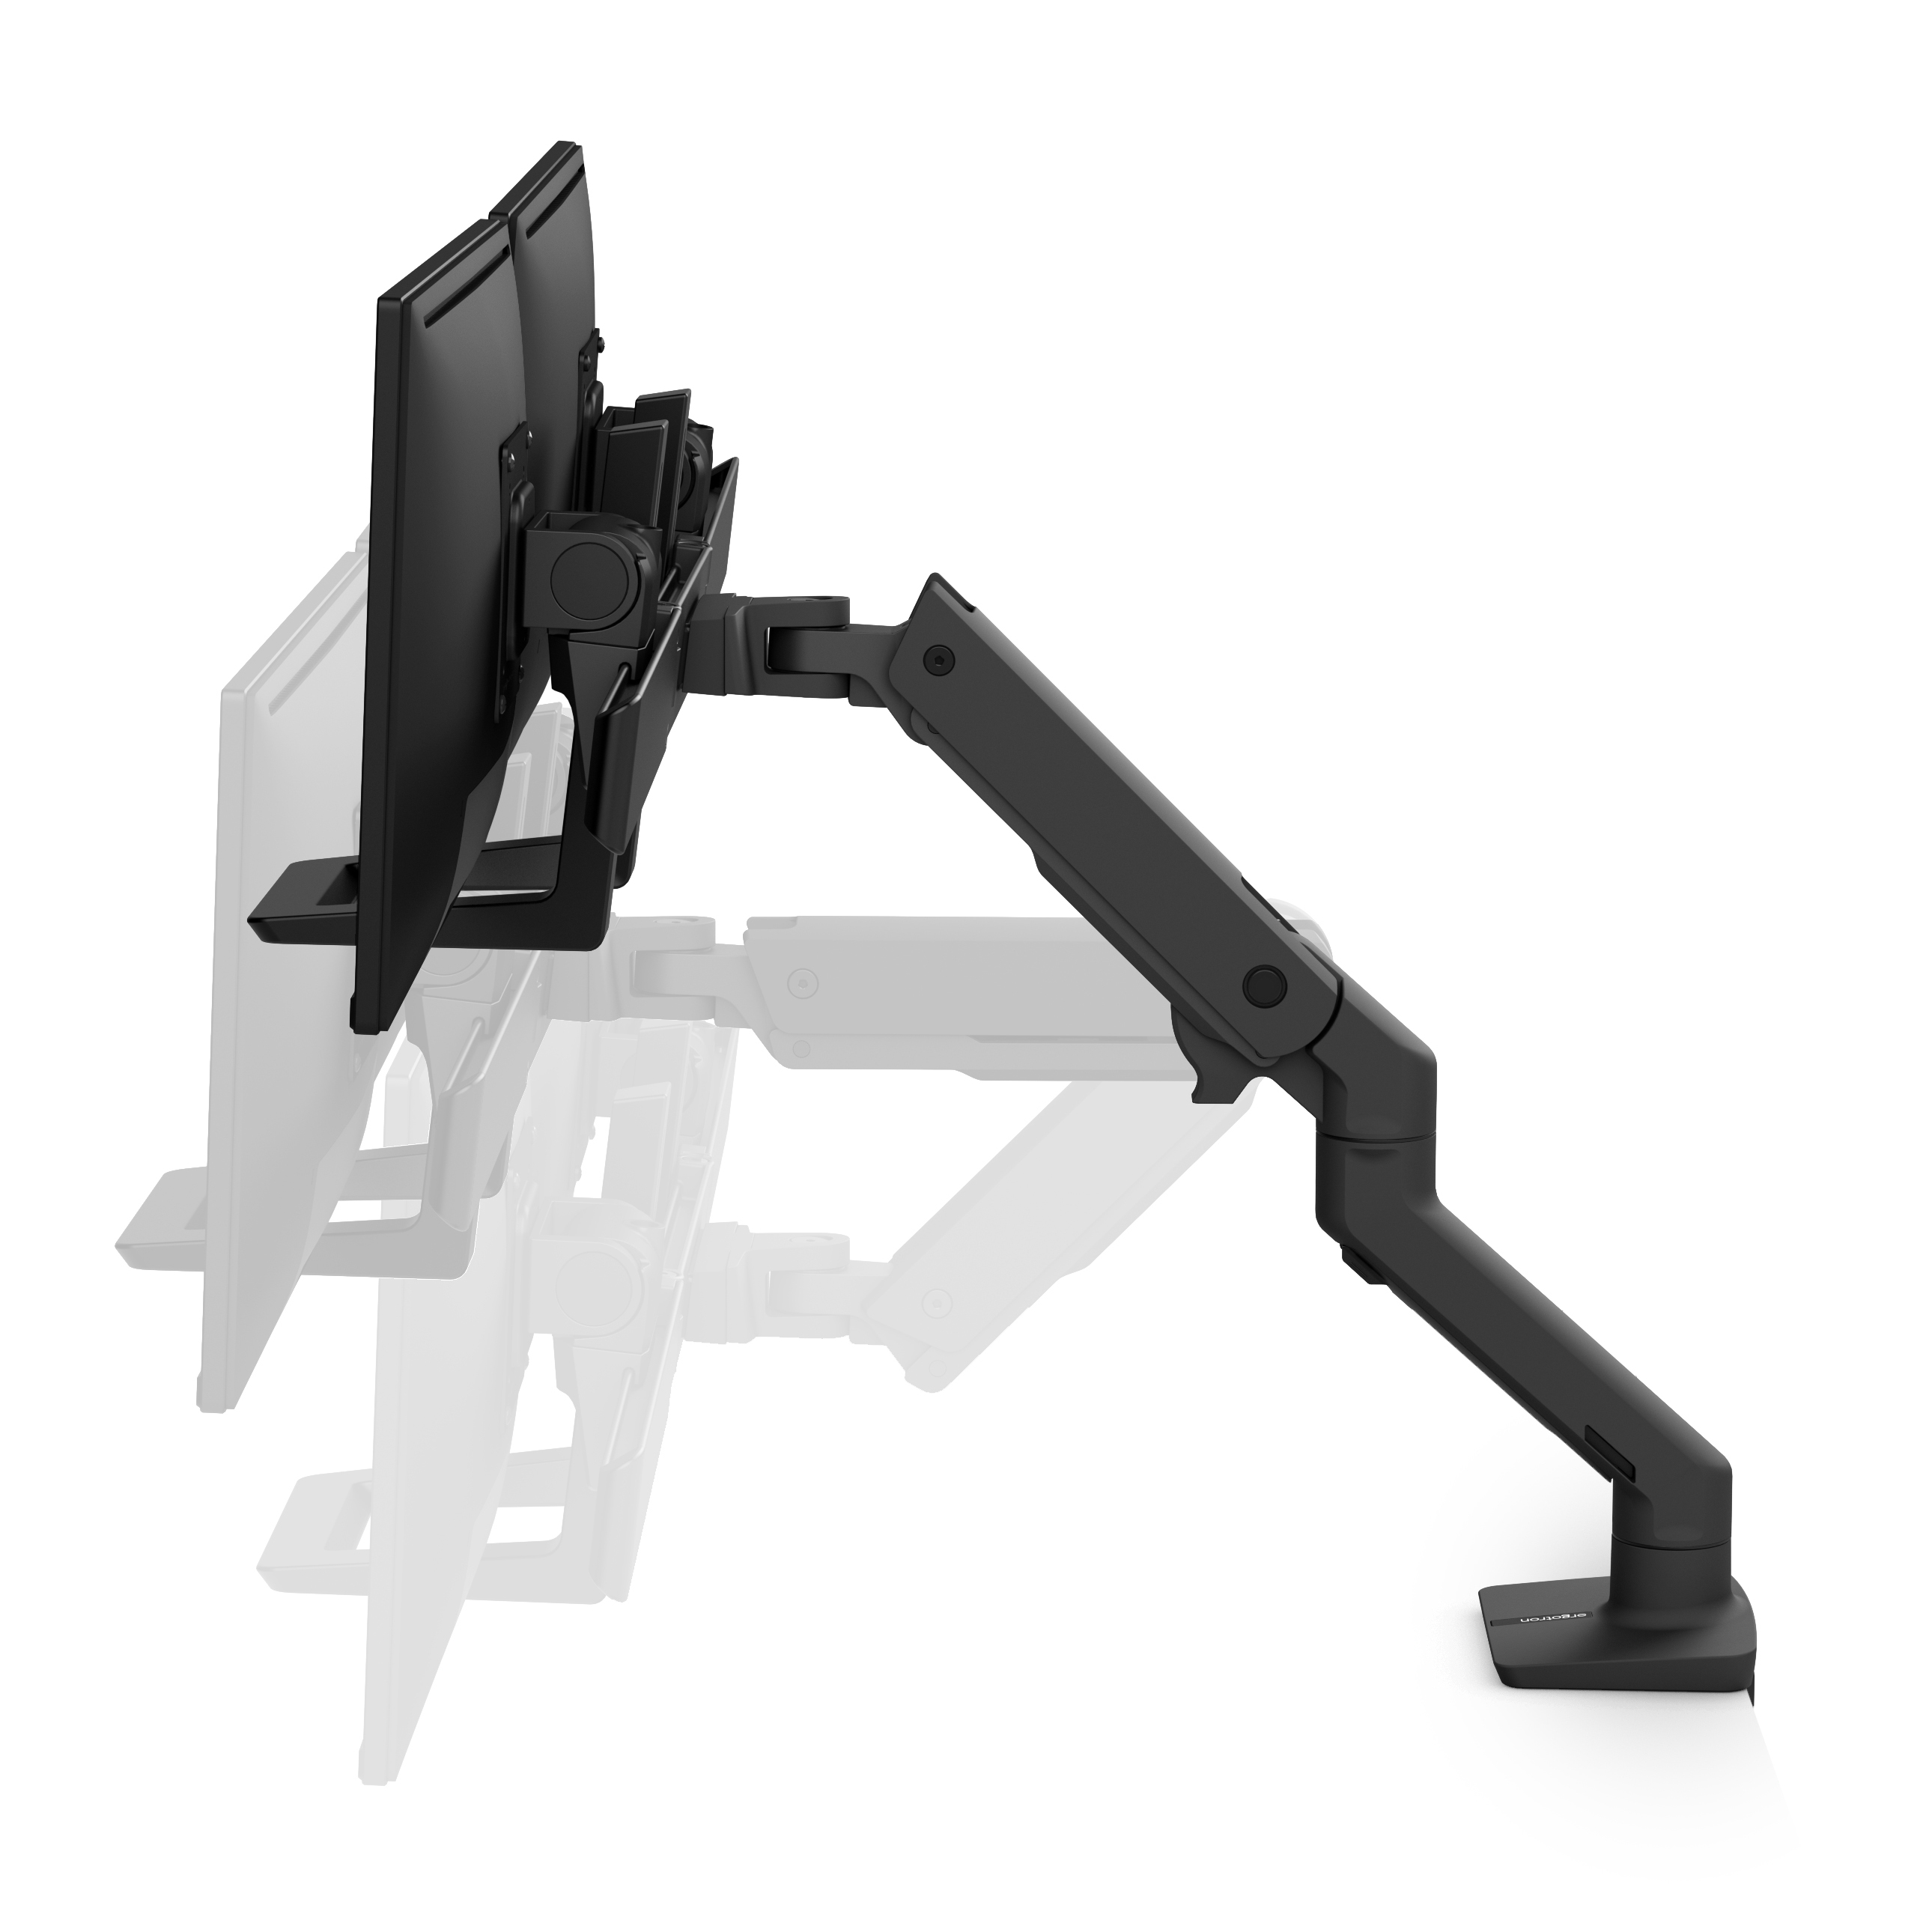 Ergotron – HX Dual Monitor Arm, VESA Desk Mount – for 2 Monitors Up to 32  Inches, 5 to 17.5 lbs Each – White